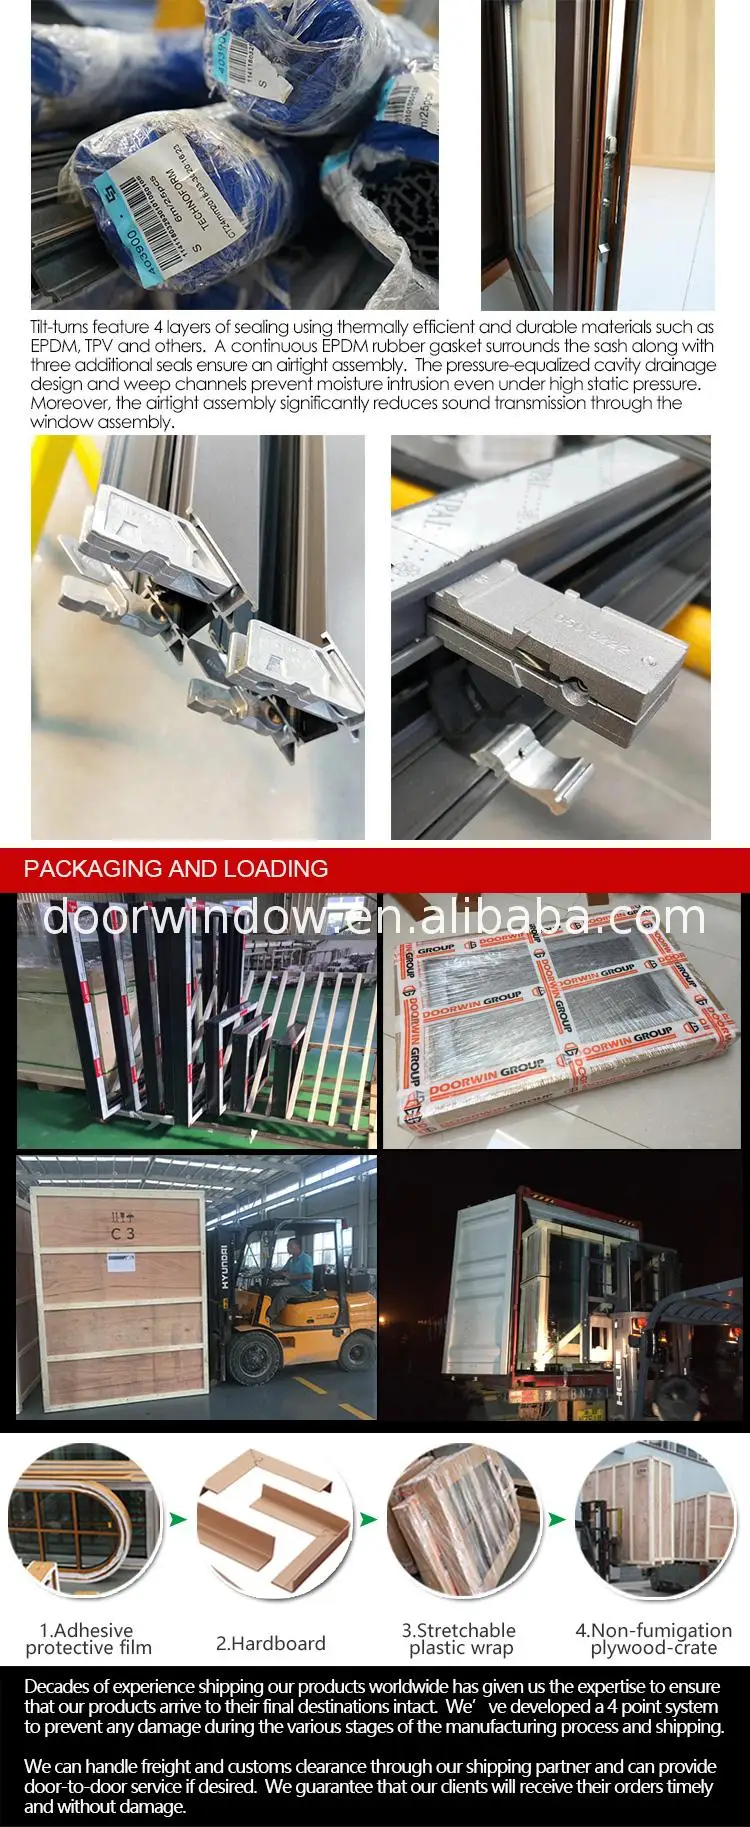 buy from China market manufacturer swing out window